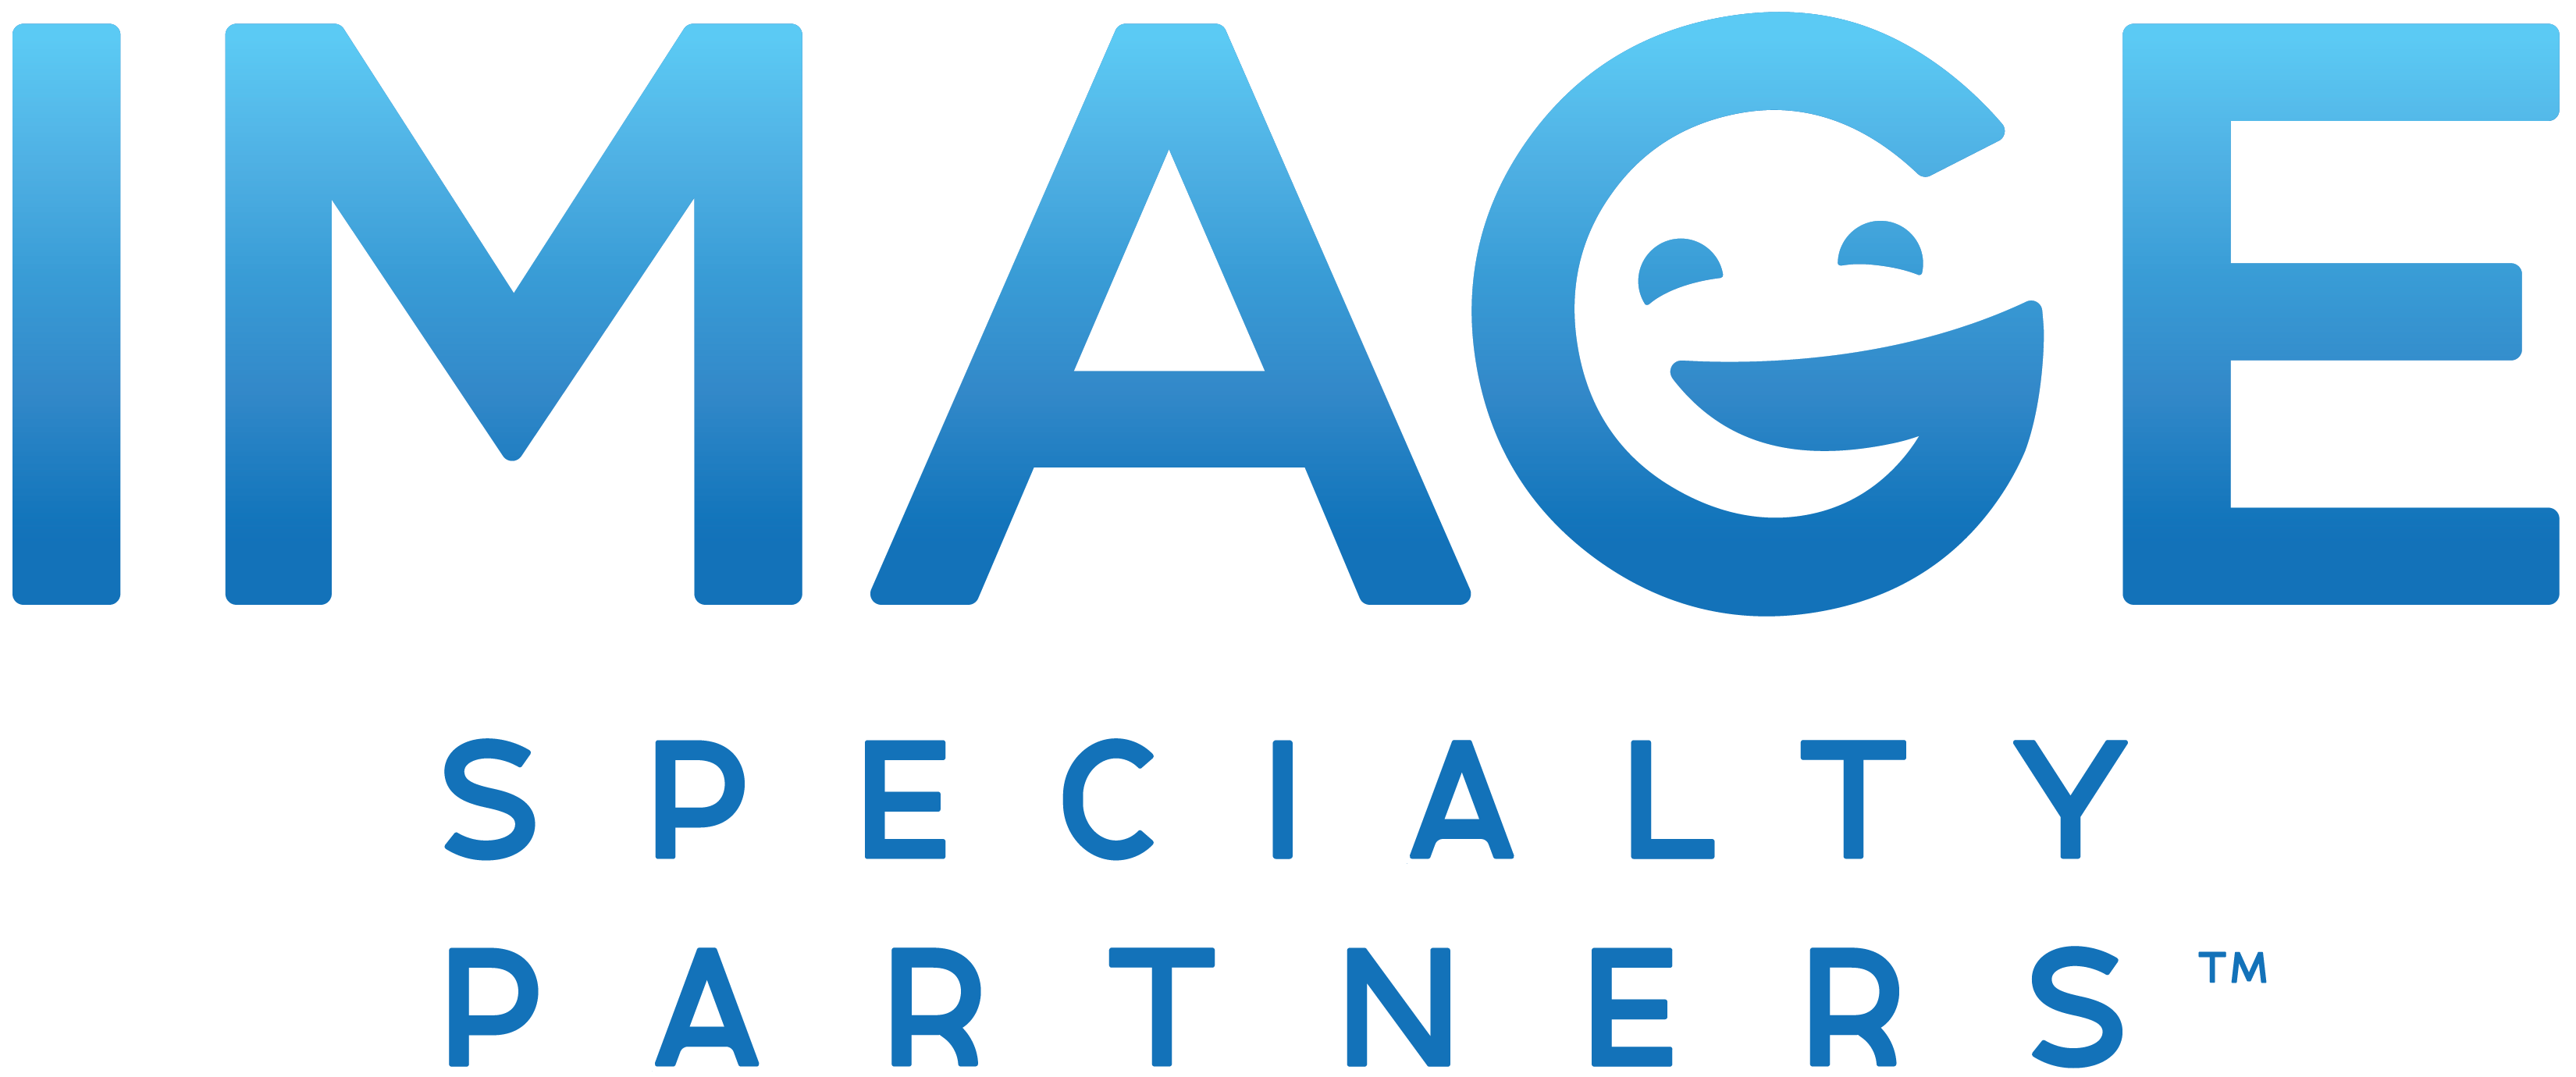 Image Specialty Partners Logo